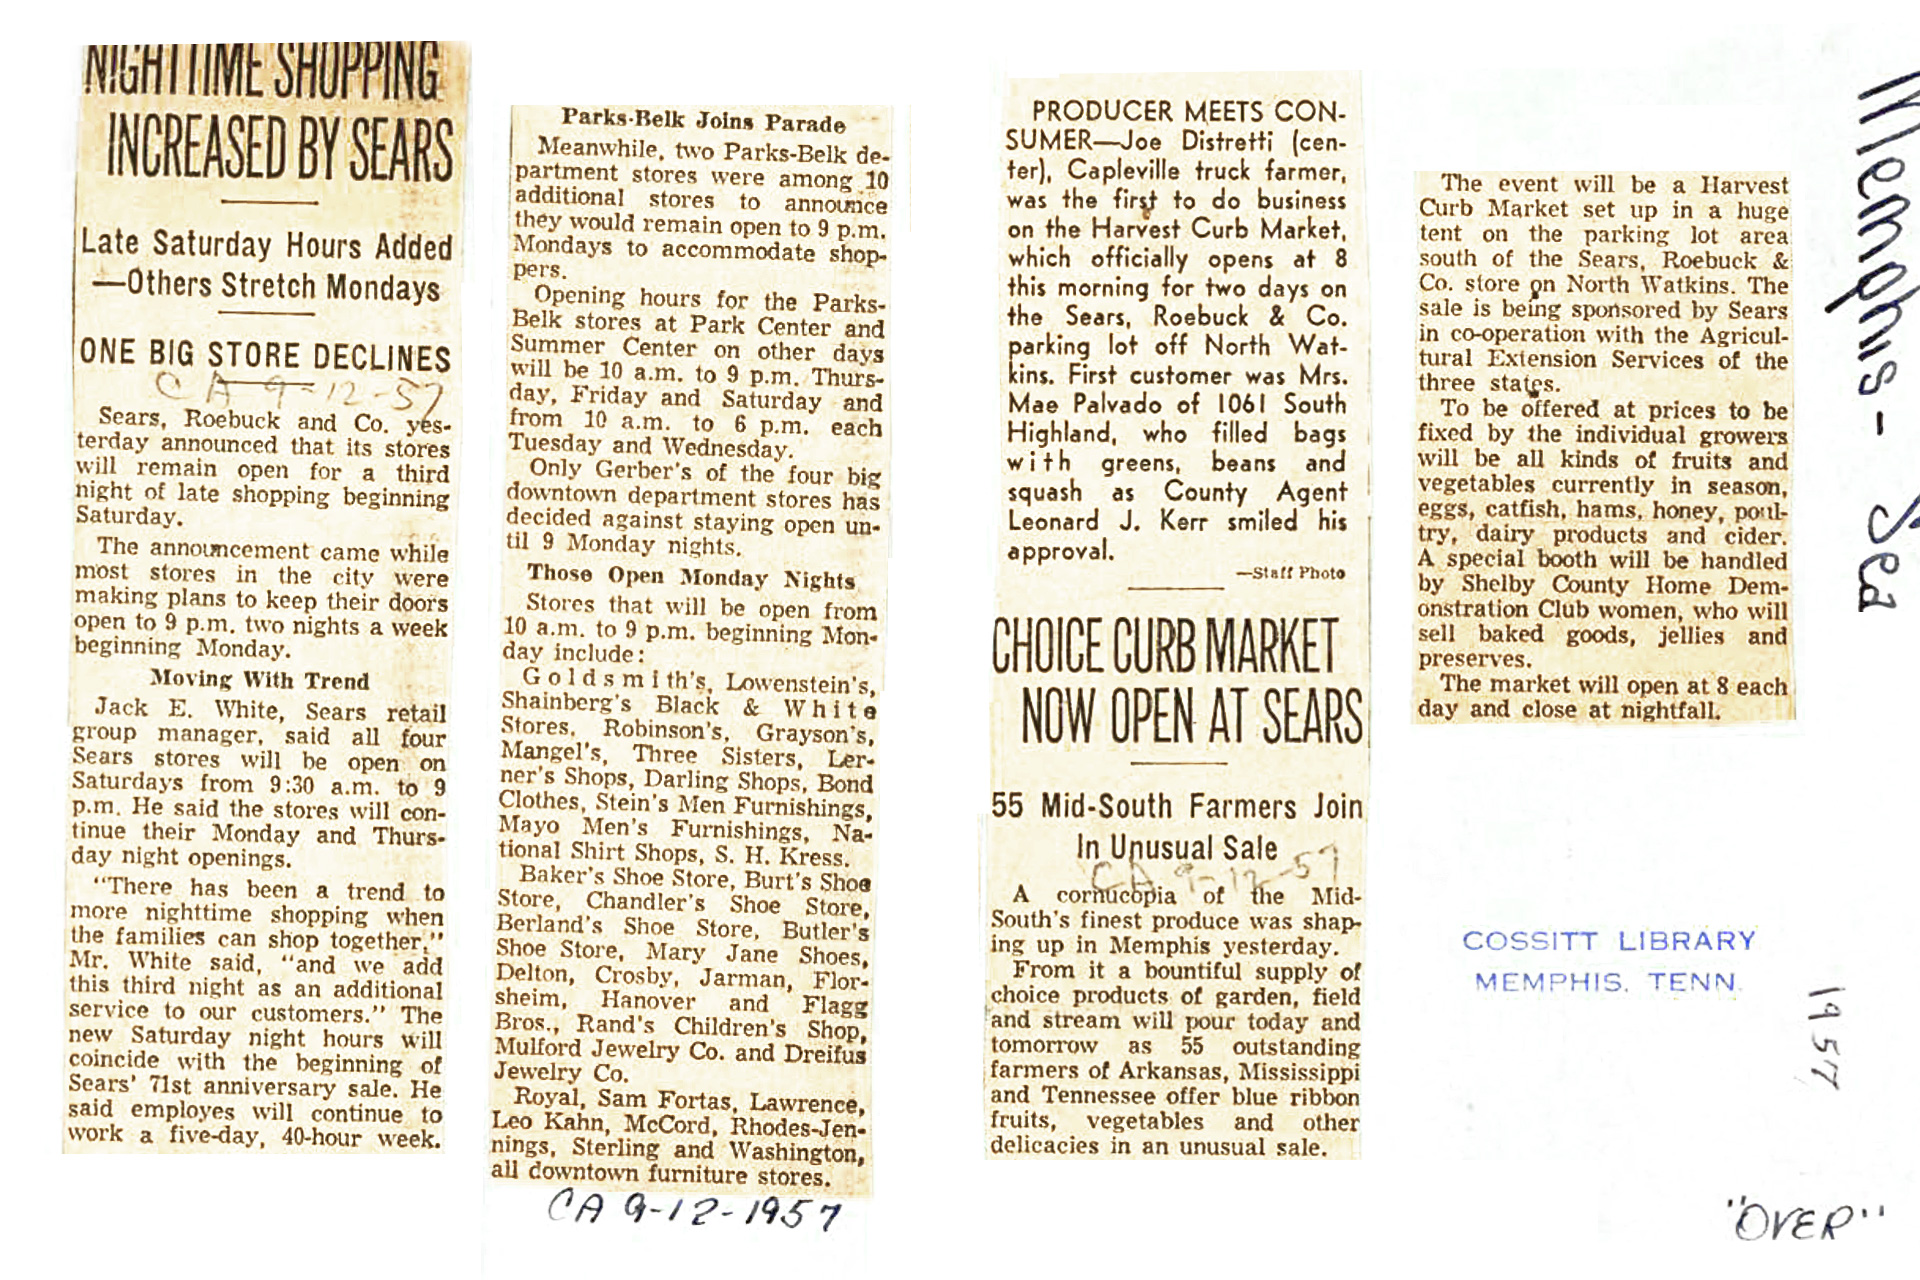 Articles from the Commercial Appeal on September 12th, 1957 about the Curb Market.